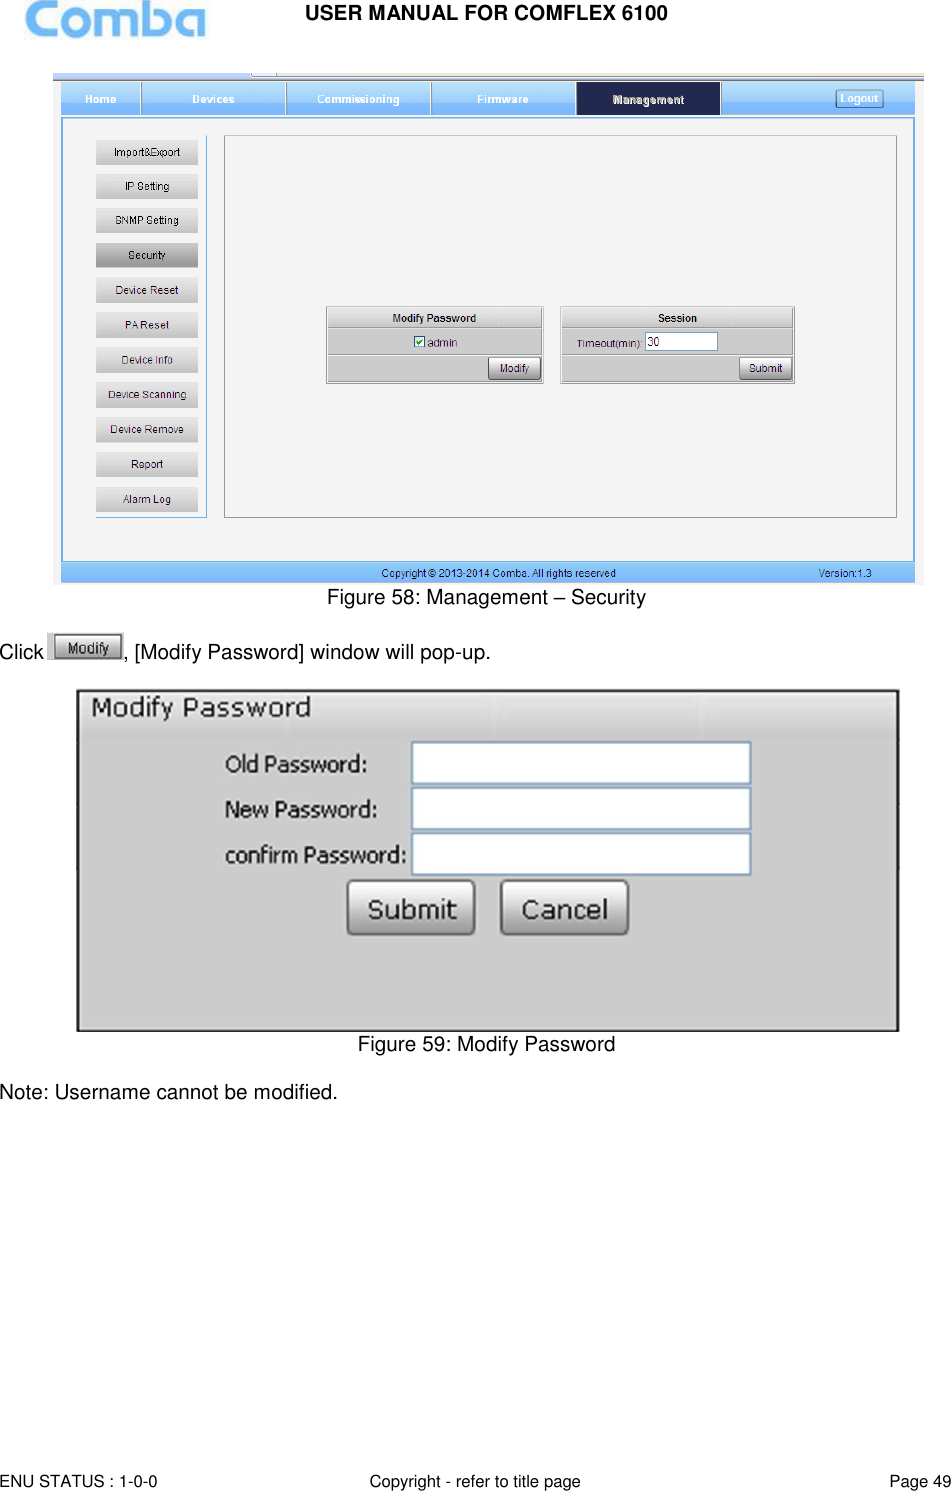 USER MANUAL FOR COMFLEX 6100  ENU STATUS : 1-0-0 Copyright - refer to title page Page 49      Figure 58: Management – Security  Click , [Modify Password] window will pop-up.    Figure 59: Modify Password  Note: Username cannot be modified.                